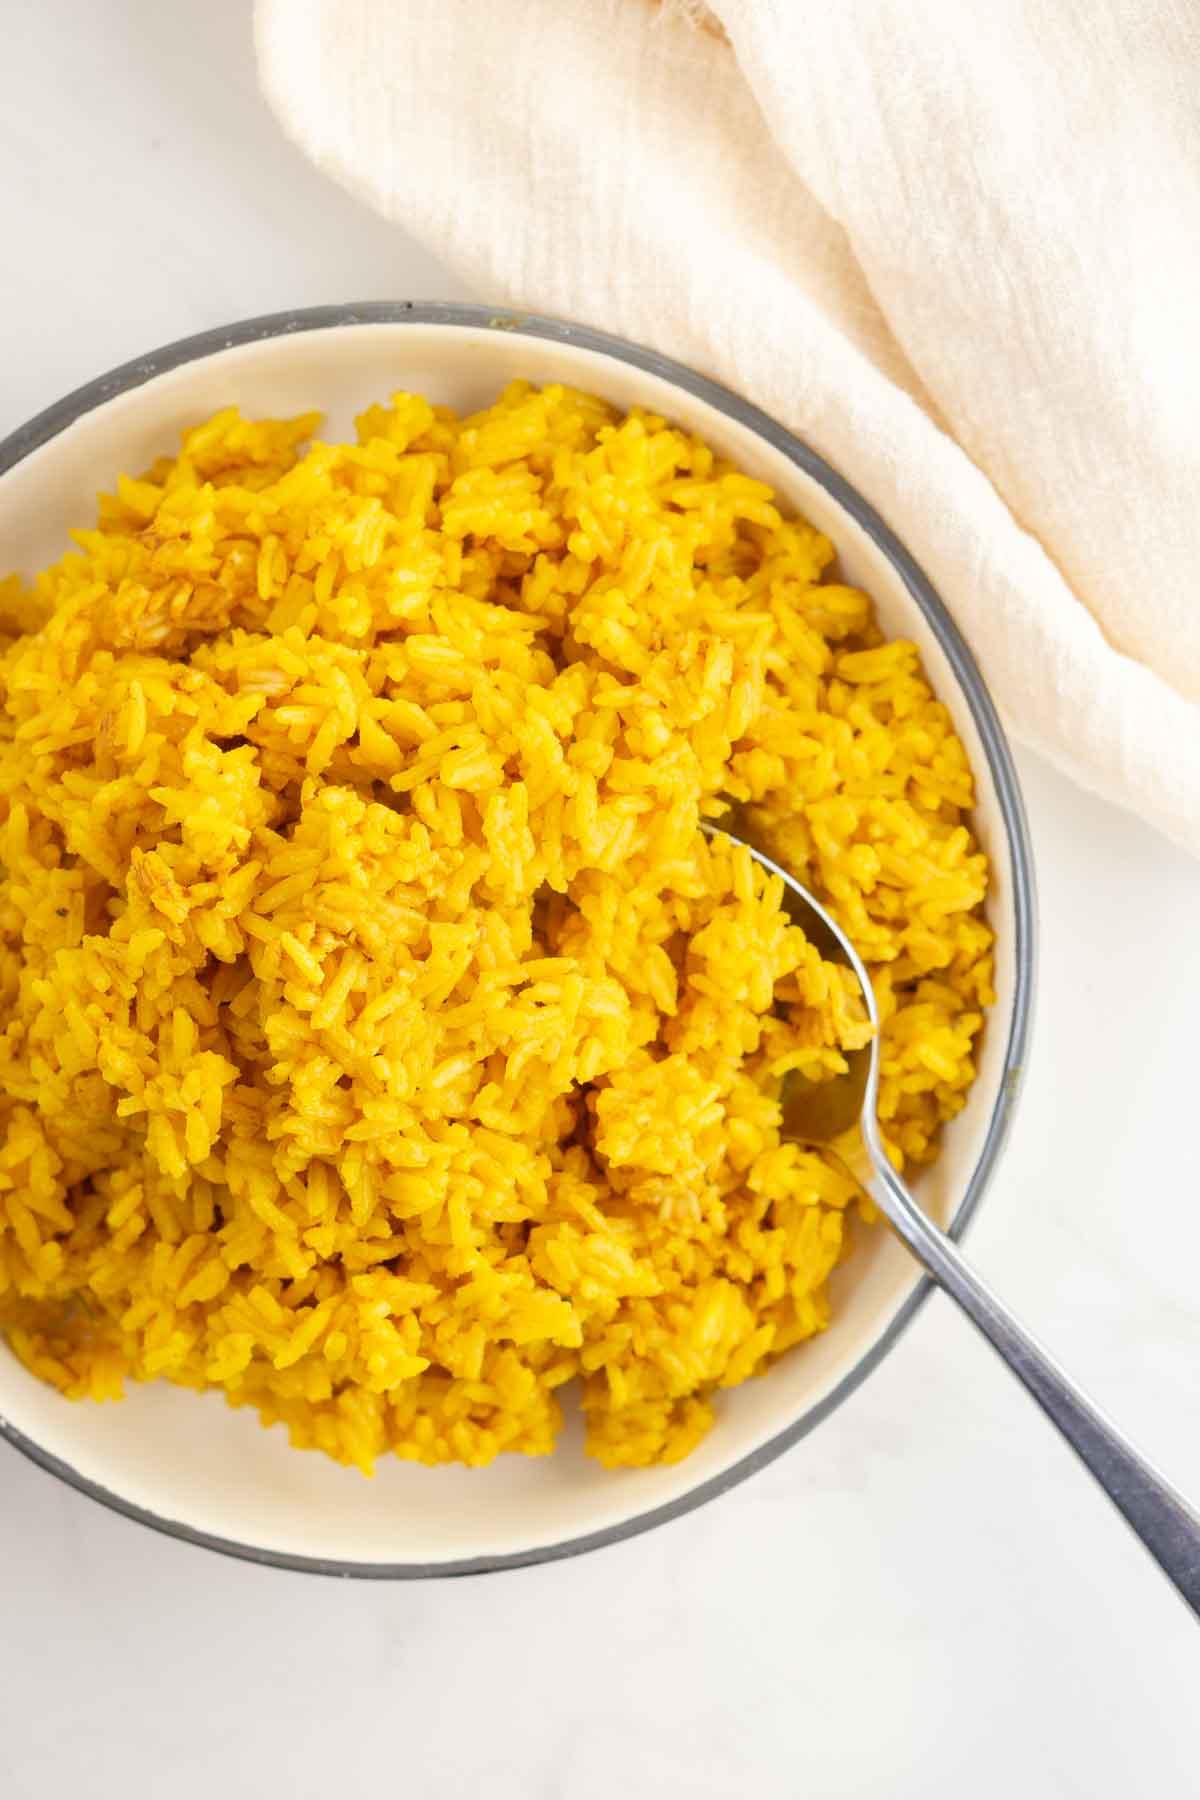 Plate of turmeric rice from above with spoon for serving